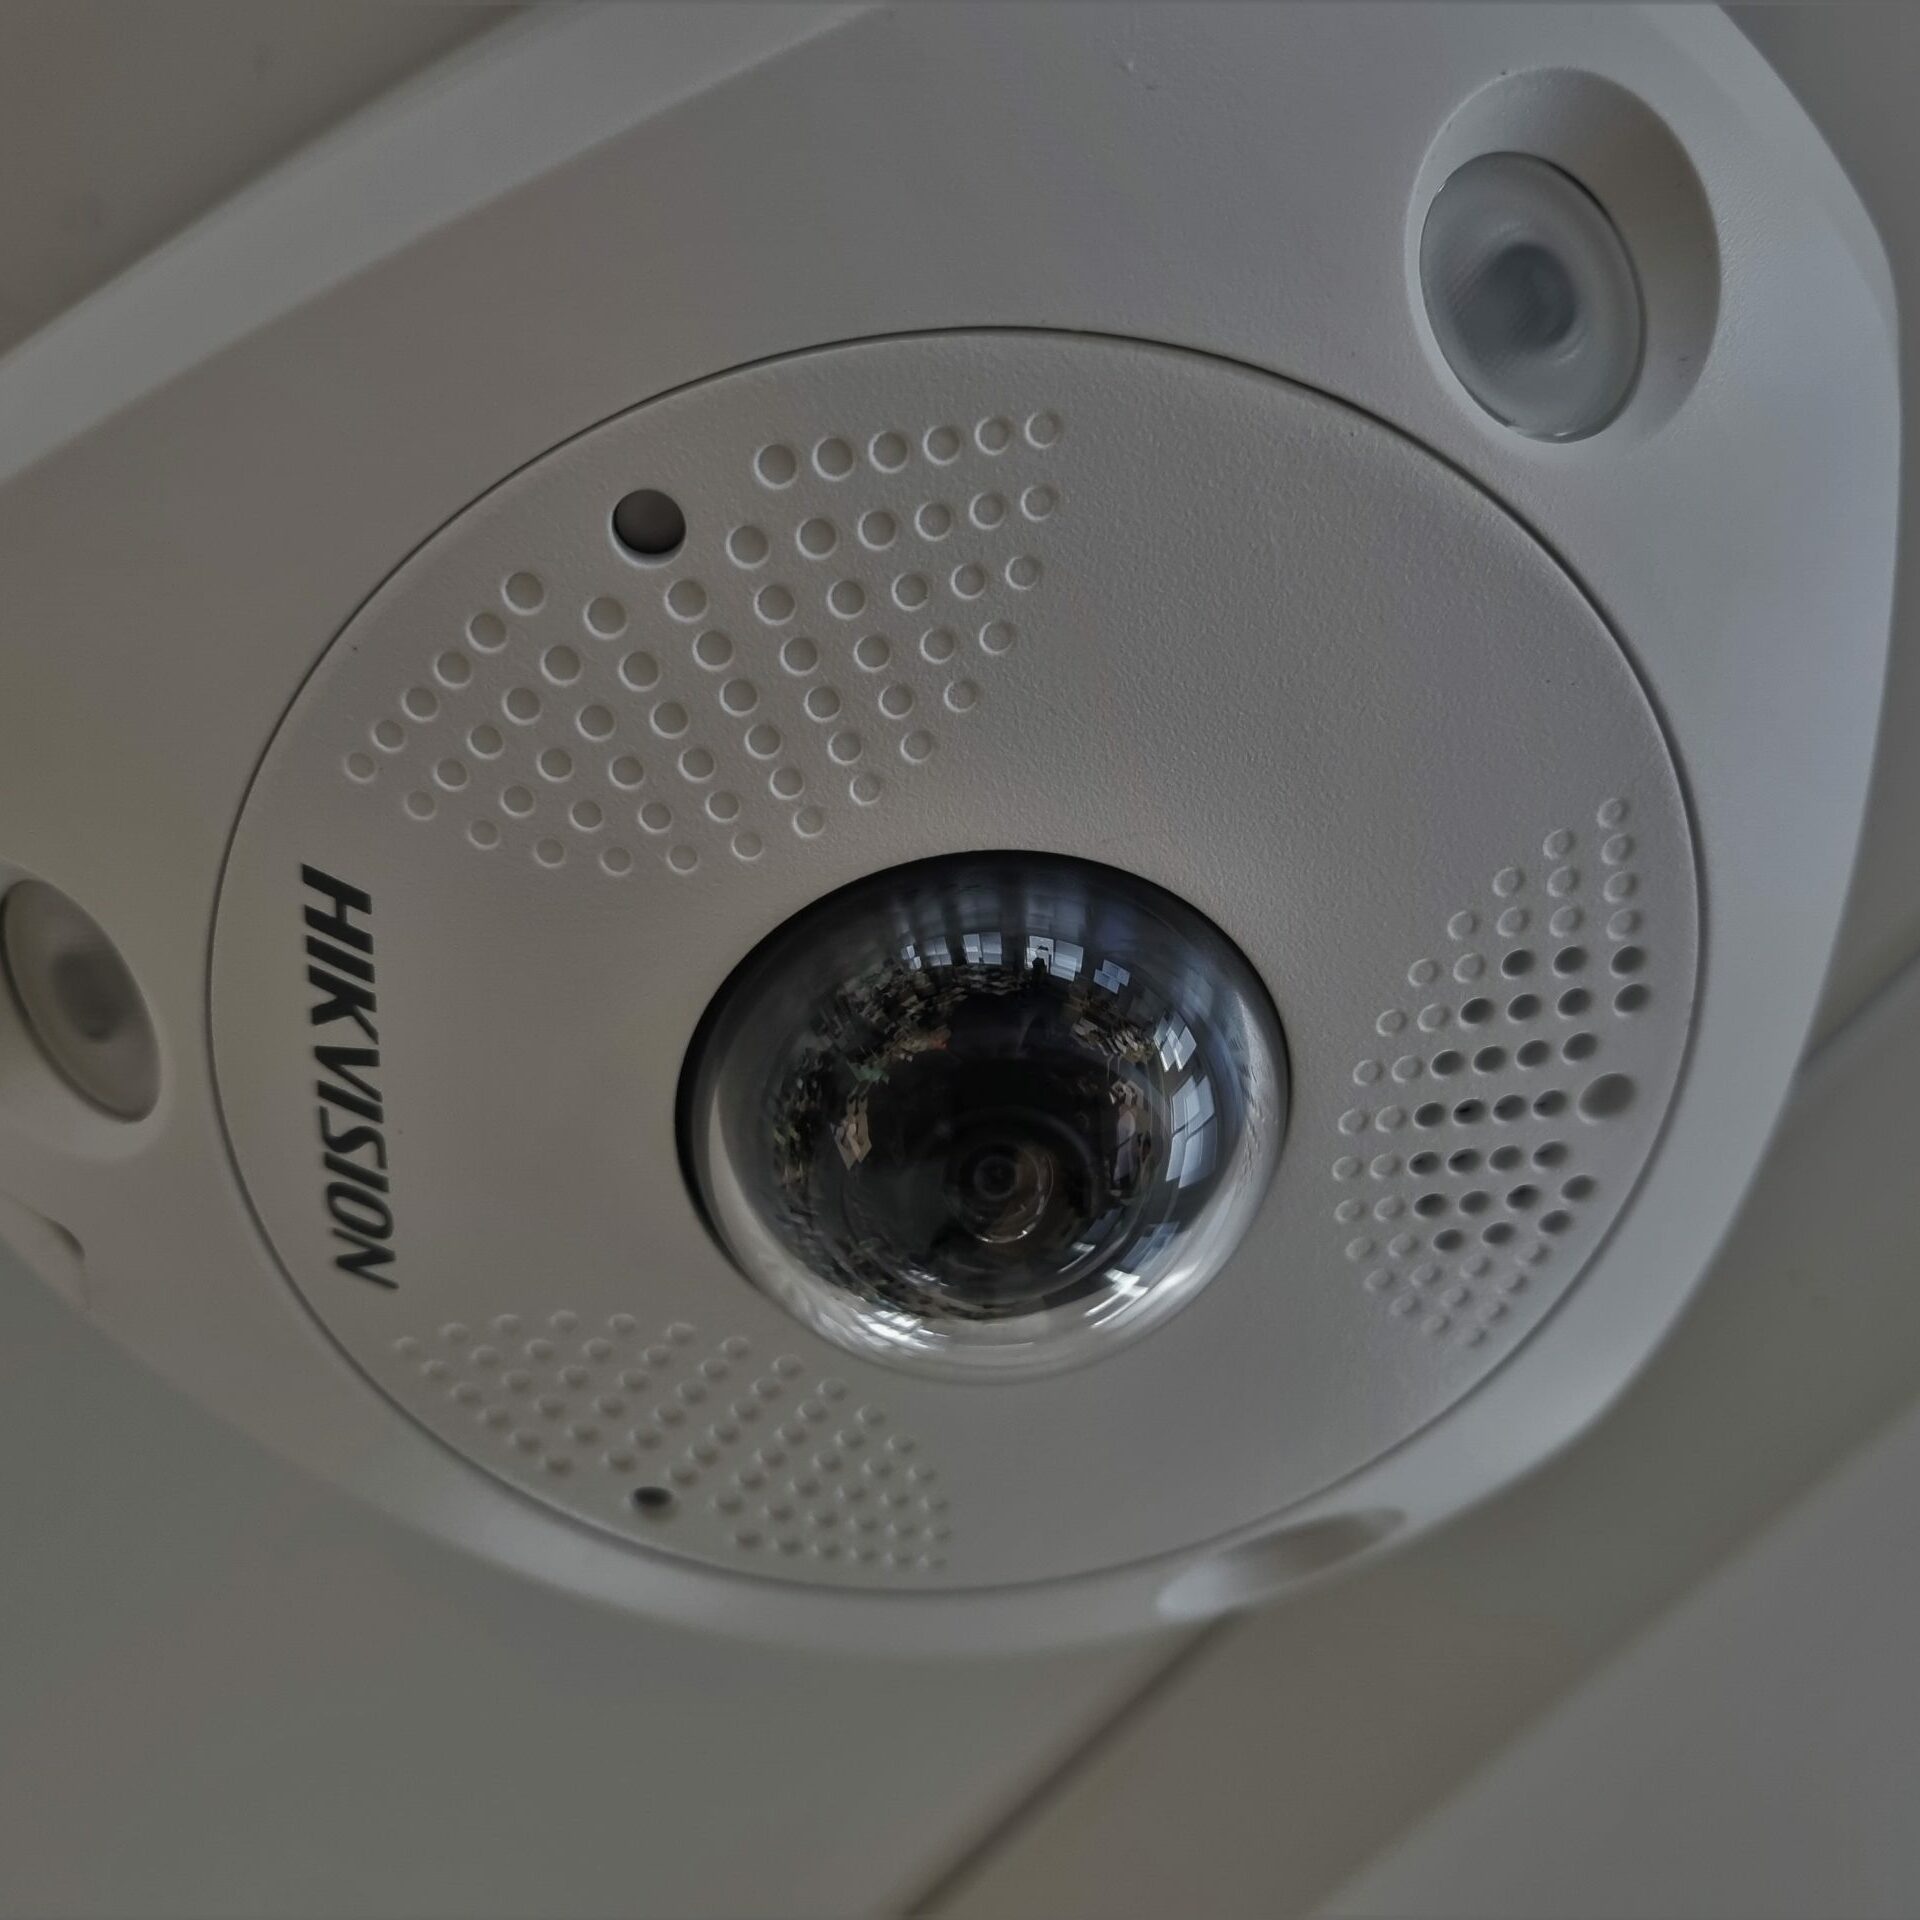 Image of a white Hikvision CCTV camera mounted to the ceiling that can record audio/sound as part of a security system.